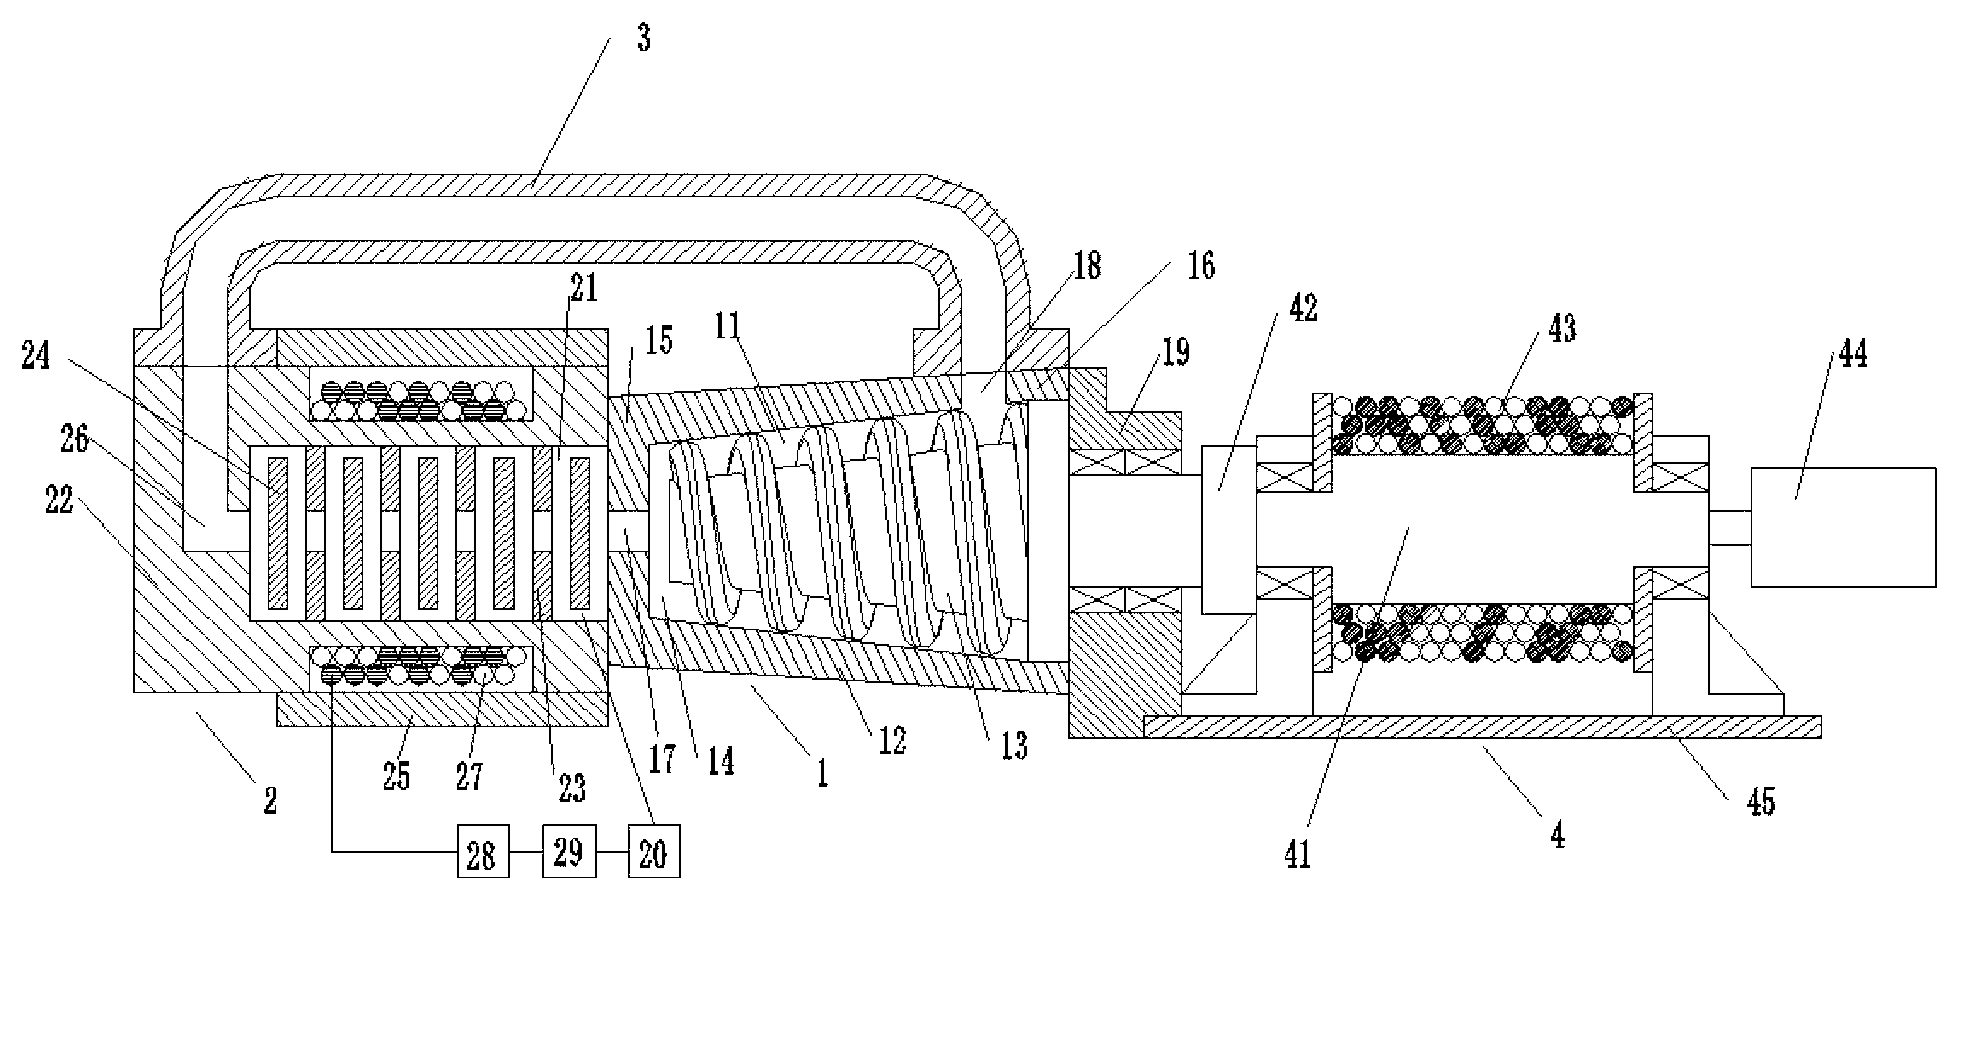 Controllable torque device based on magnetorheological materials